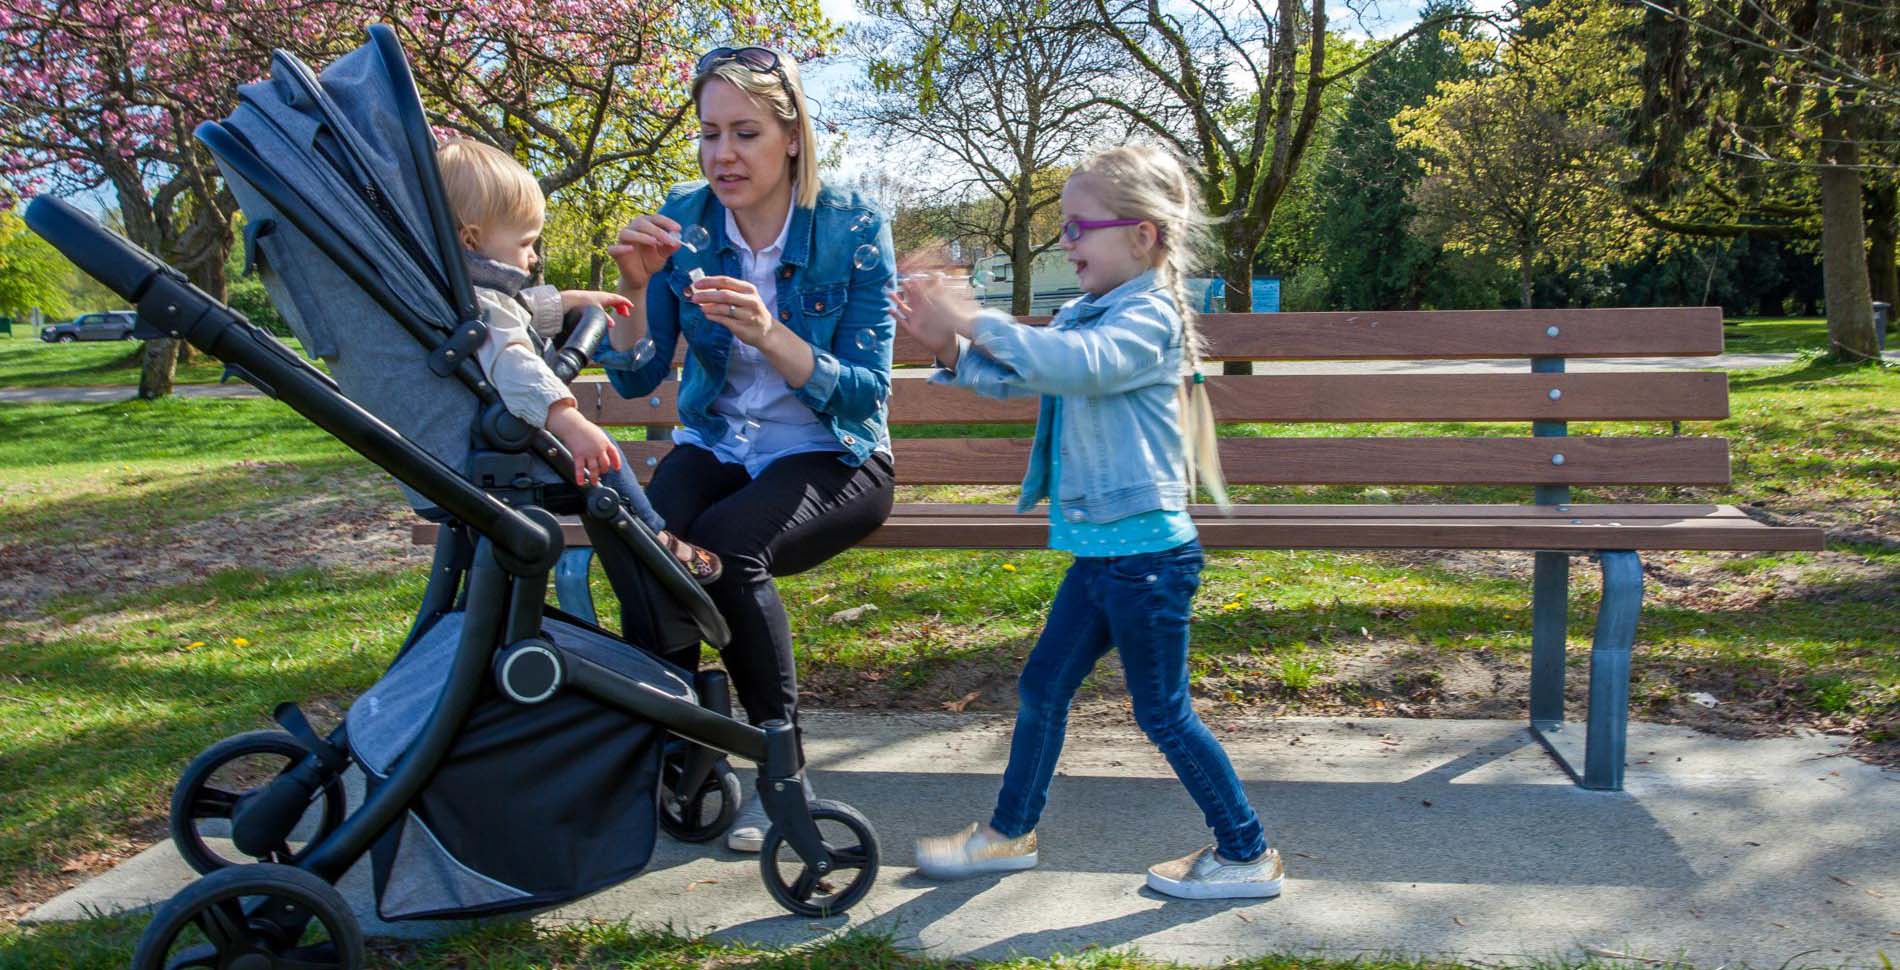 guzzie and guss connect stroller